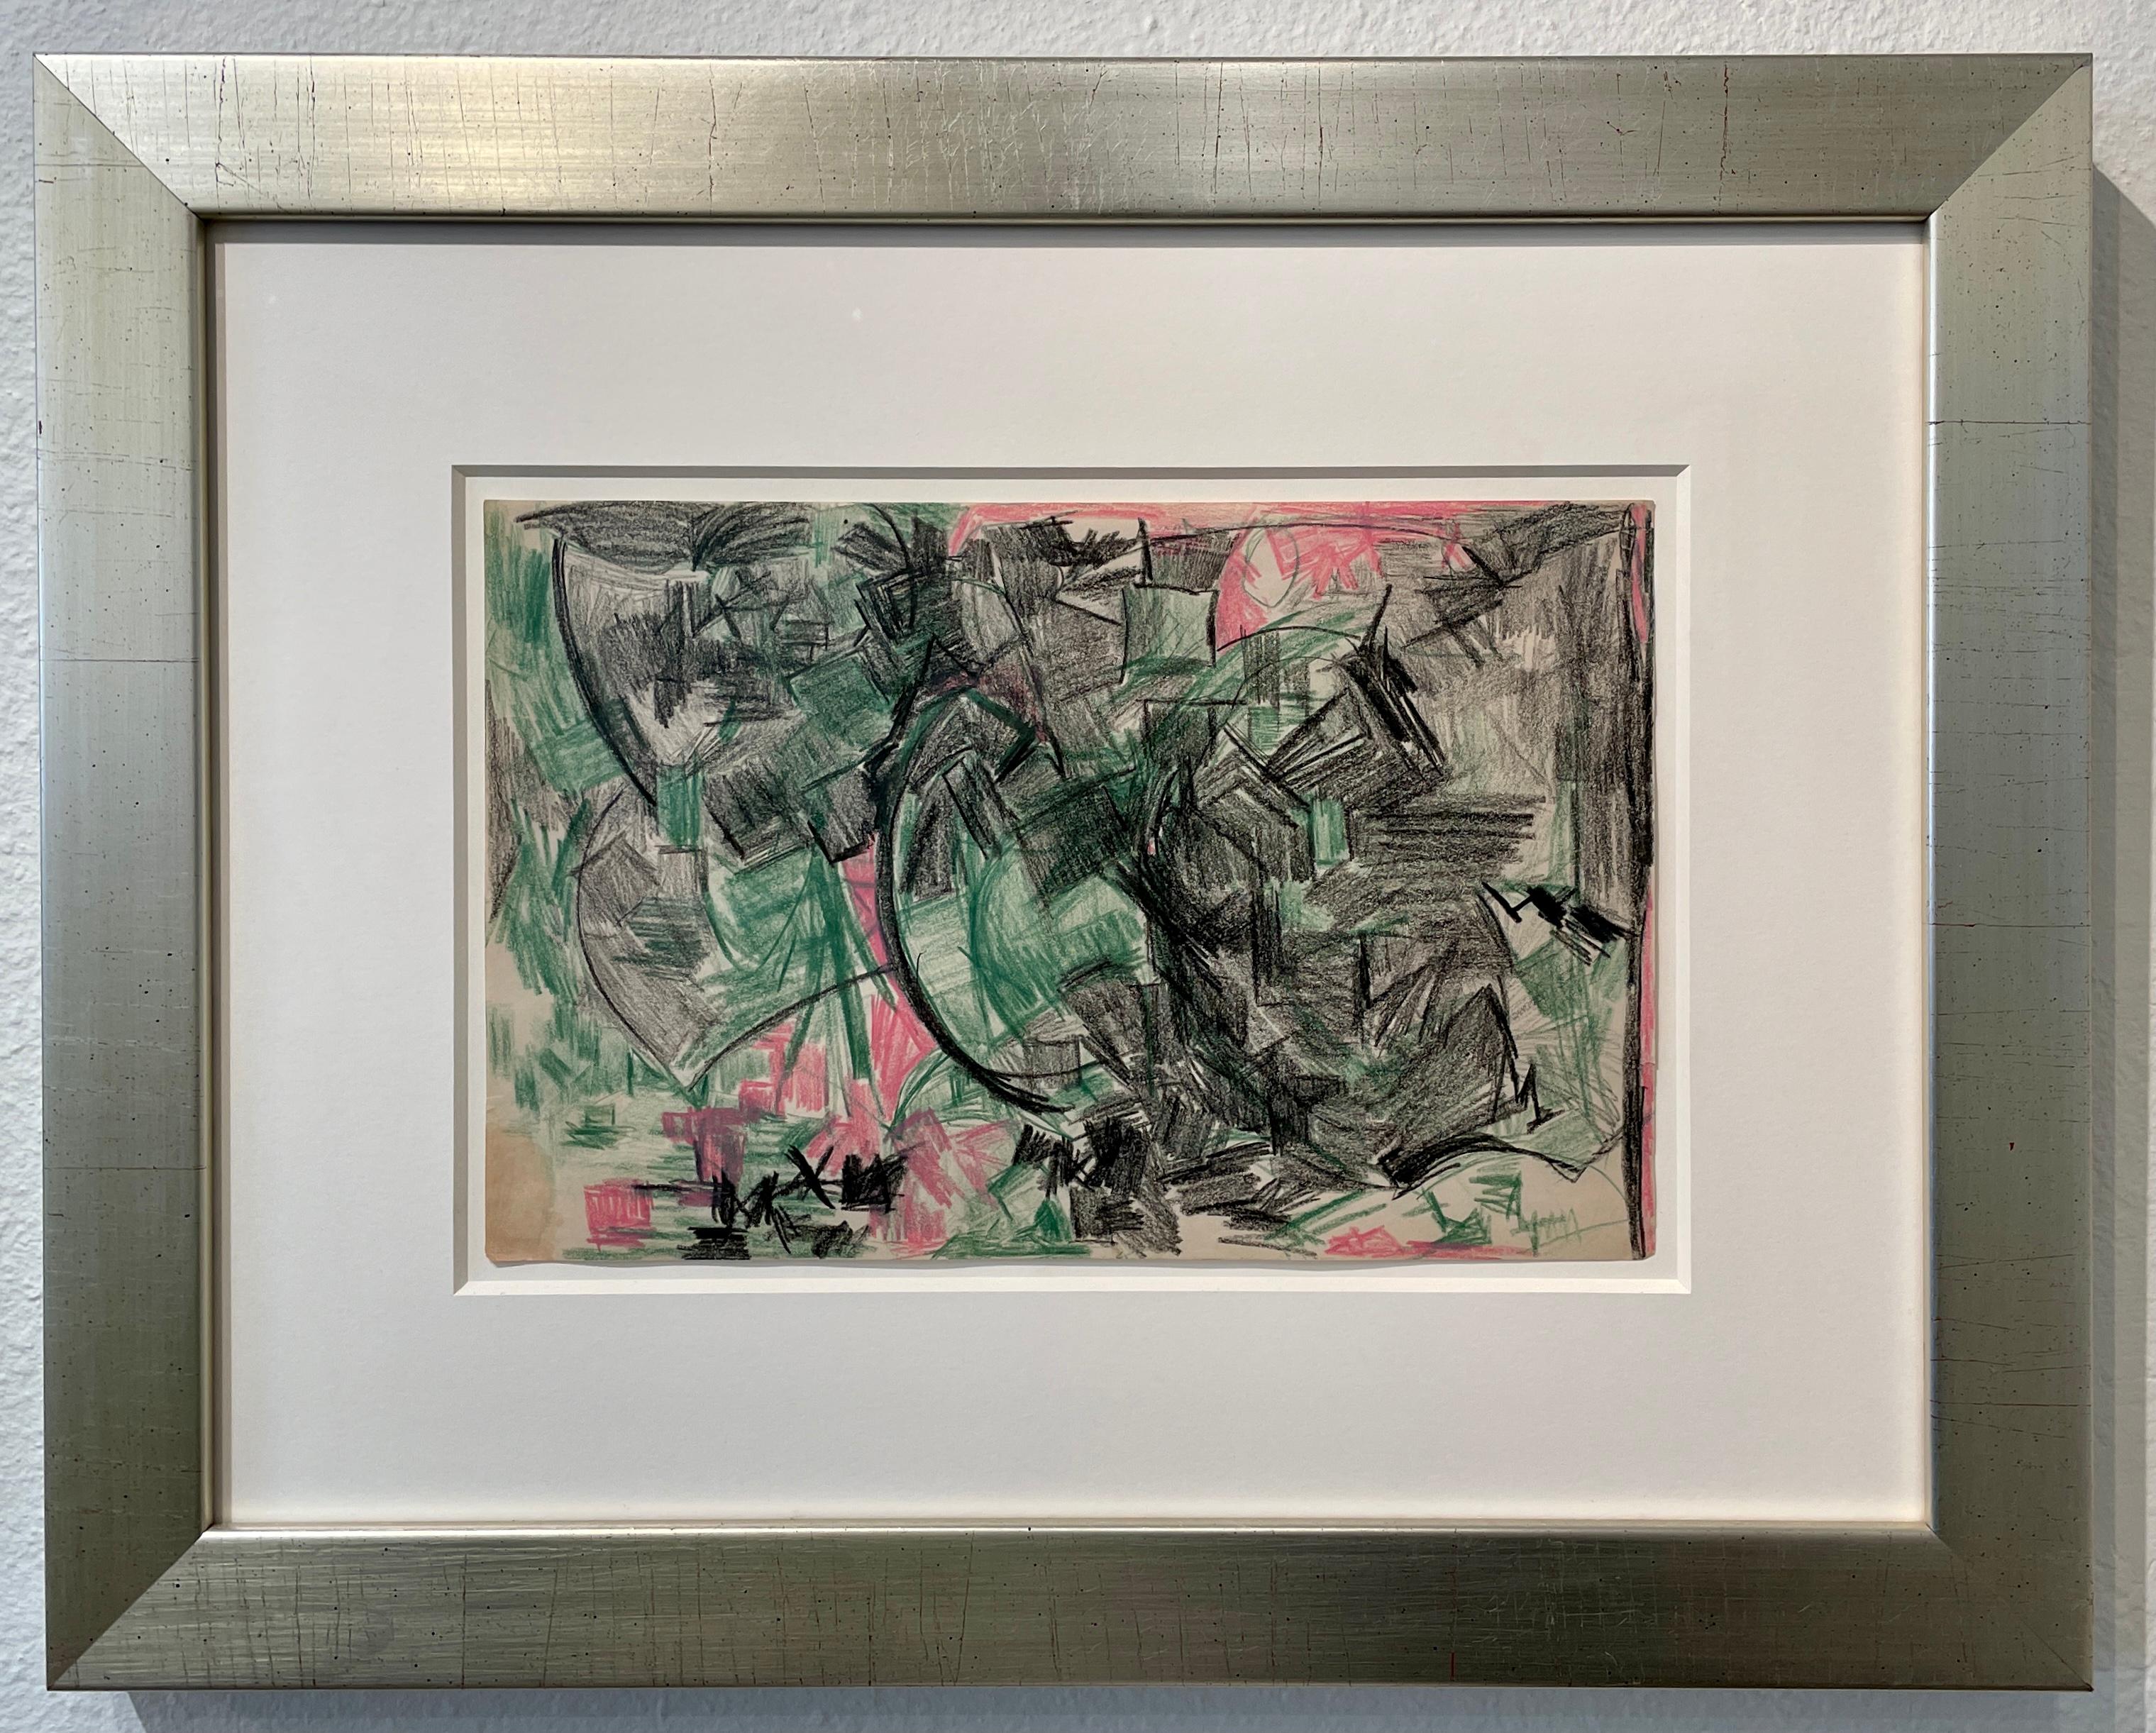 Untitled (Green and Pink) 1957, by Lynne Mapp Drexler Mid-Century Abstract Expressionist on Paper

Provenance:  Drexler Estate

LYNNE MAPP DREXLER (American, 1928-1999)

Southern-born Lynne Mapp Drexler found her artistic voice during one of the